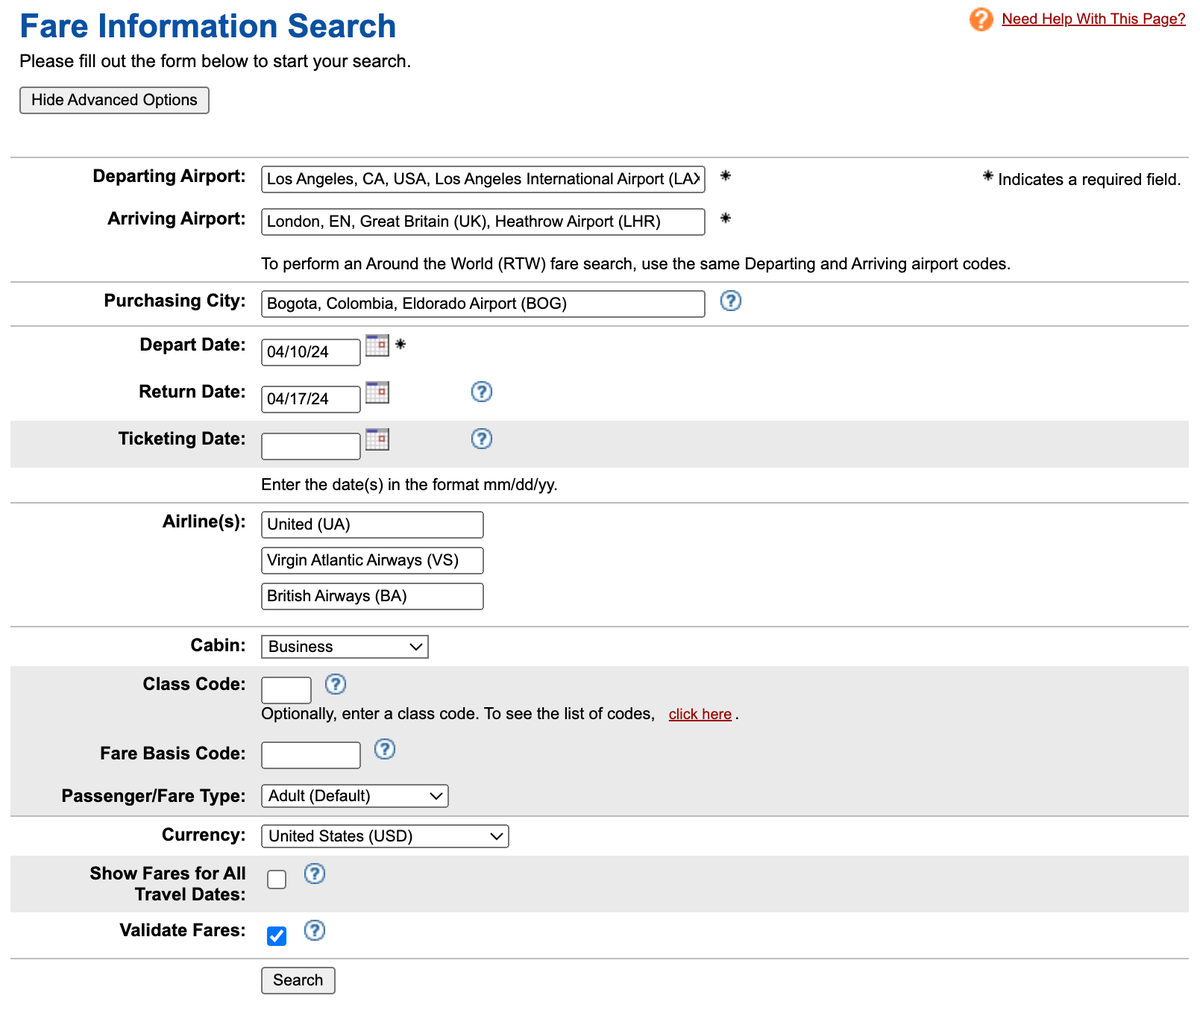 ExpertFlyer fare information search page advanced options